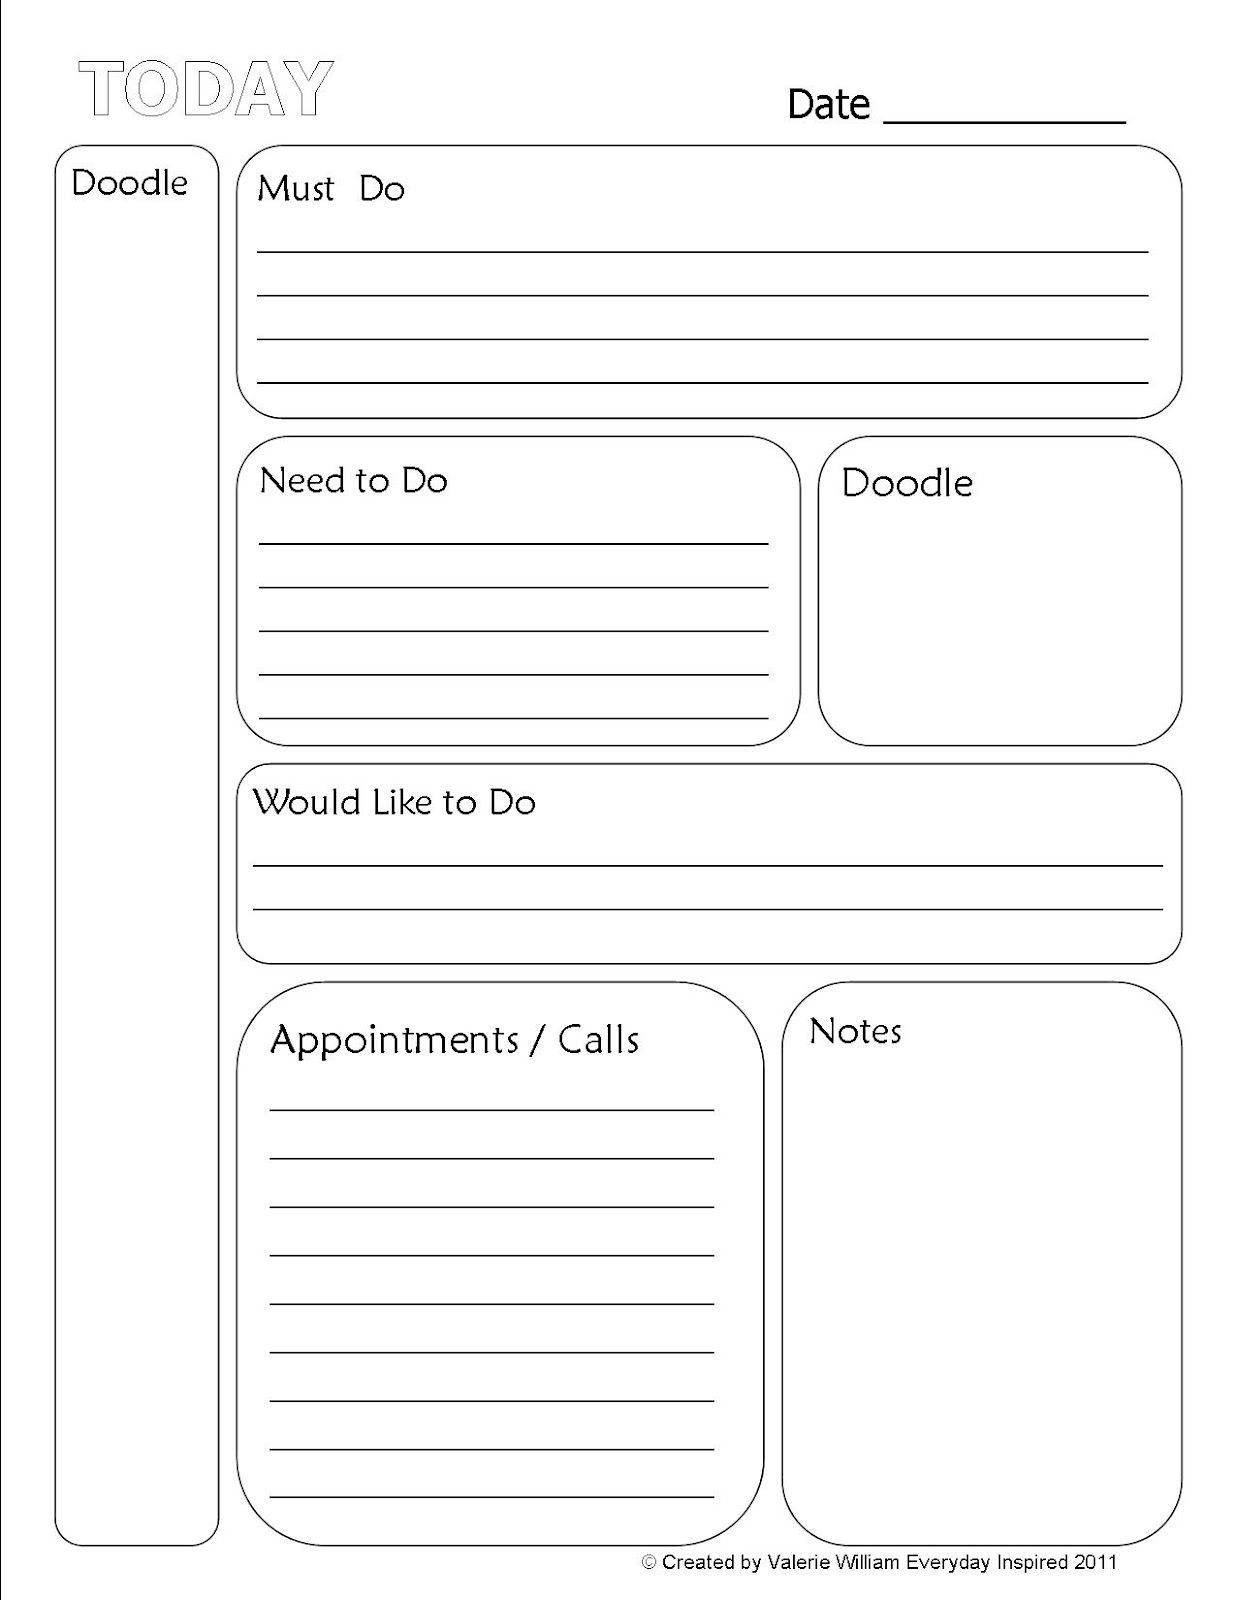 Free To Do List | Printable To-Do List | Planner Addict - Free Printable To Do List Planner